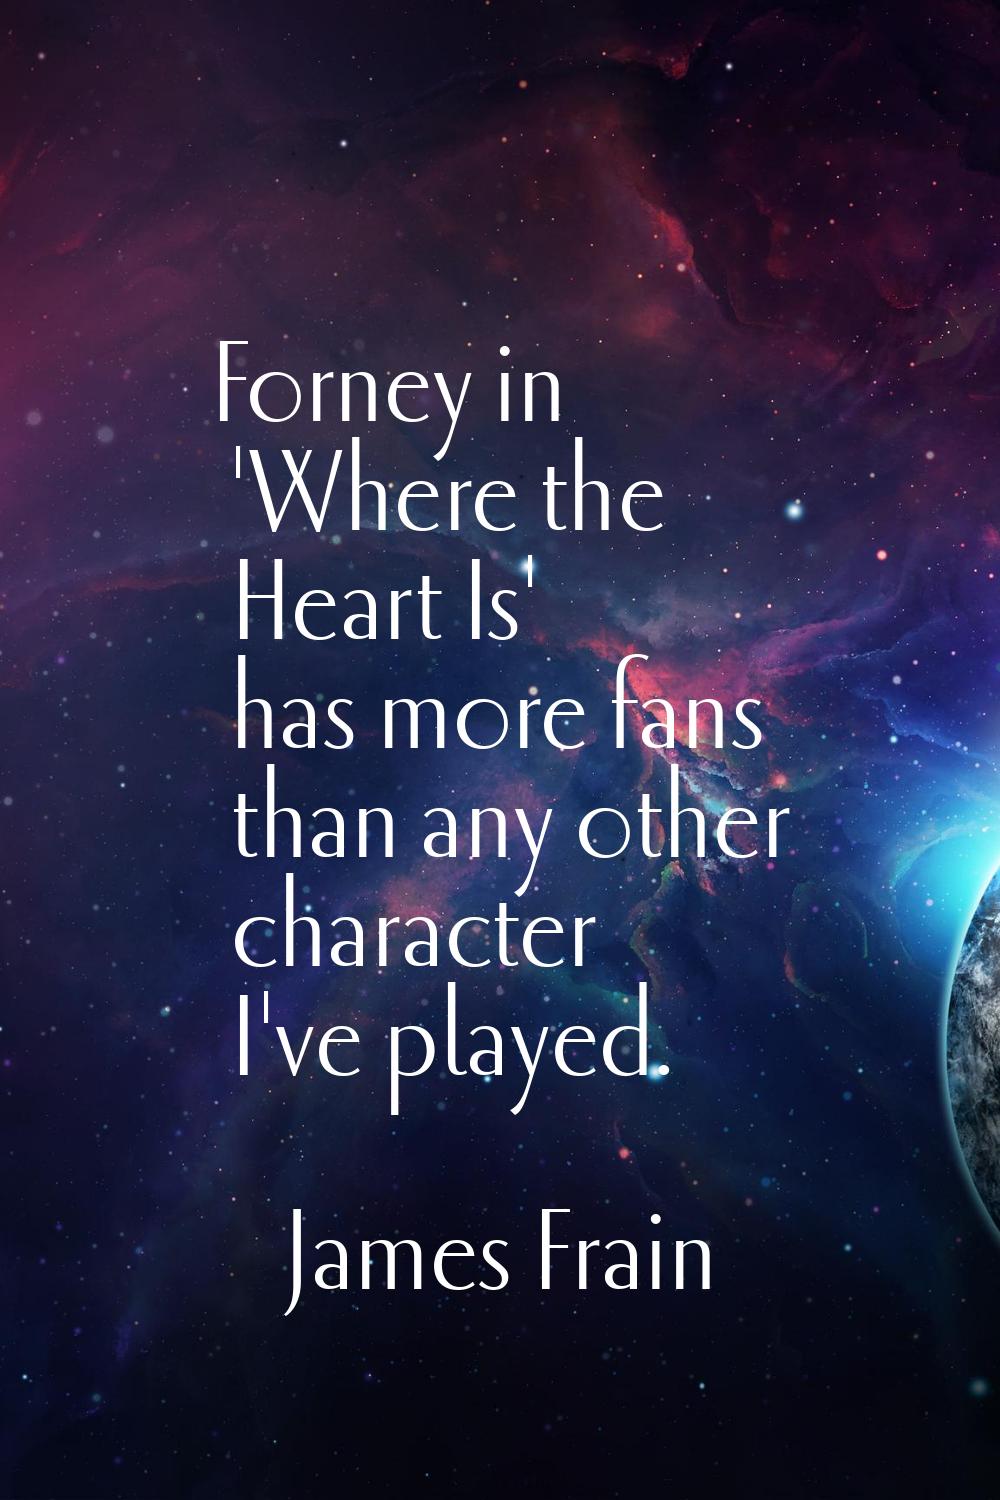 Forney in 'Where the Heart Is' has more fans than any other character I've played.